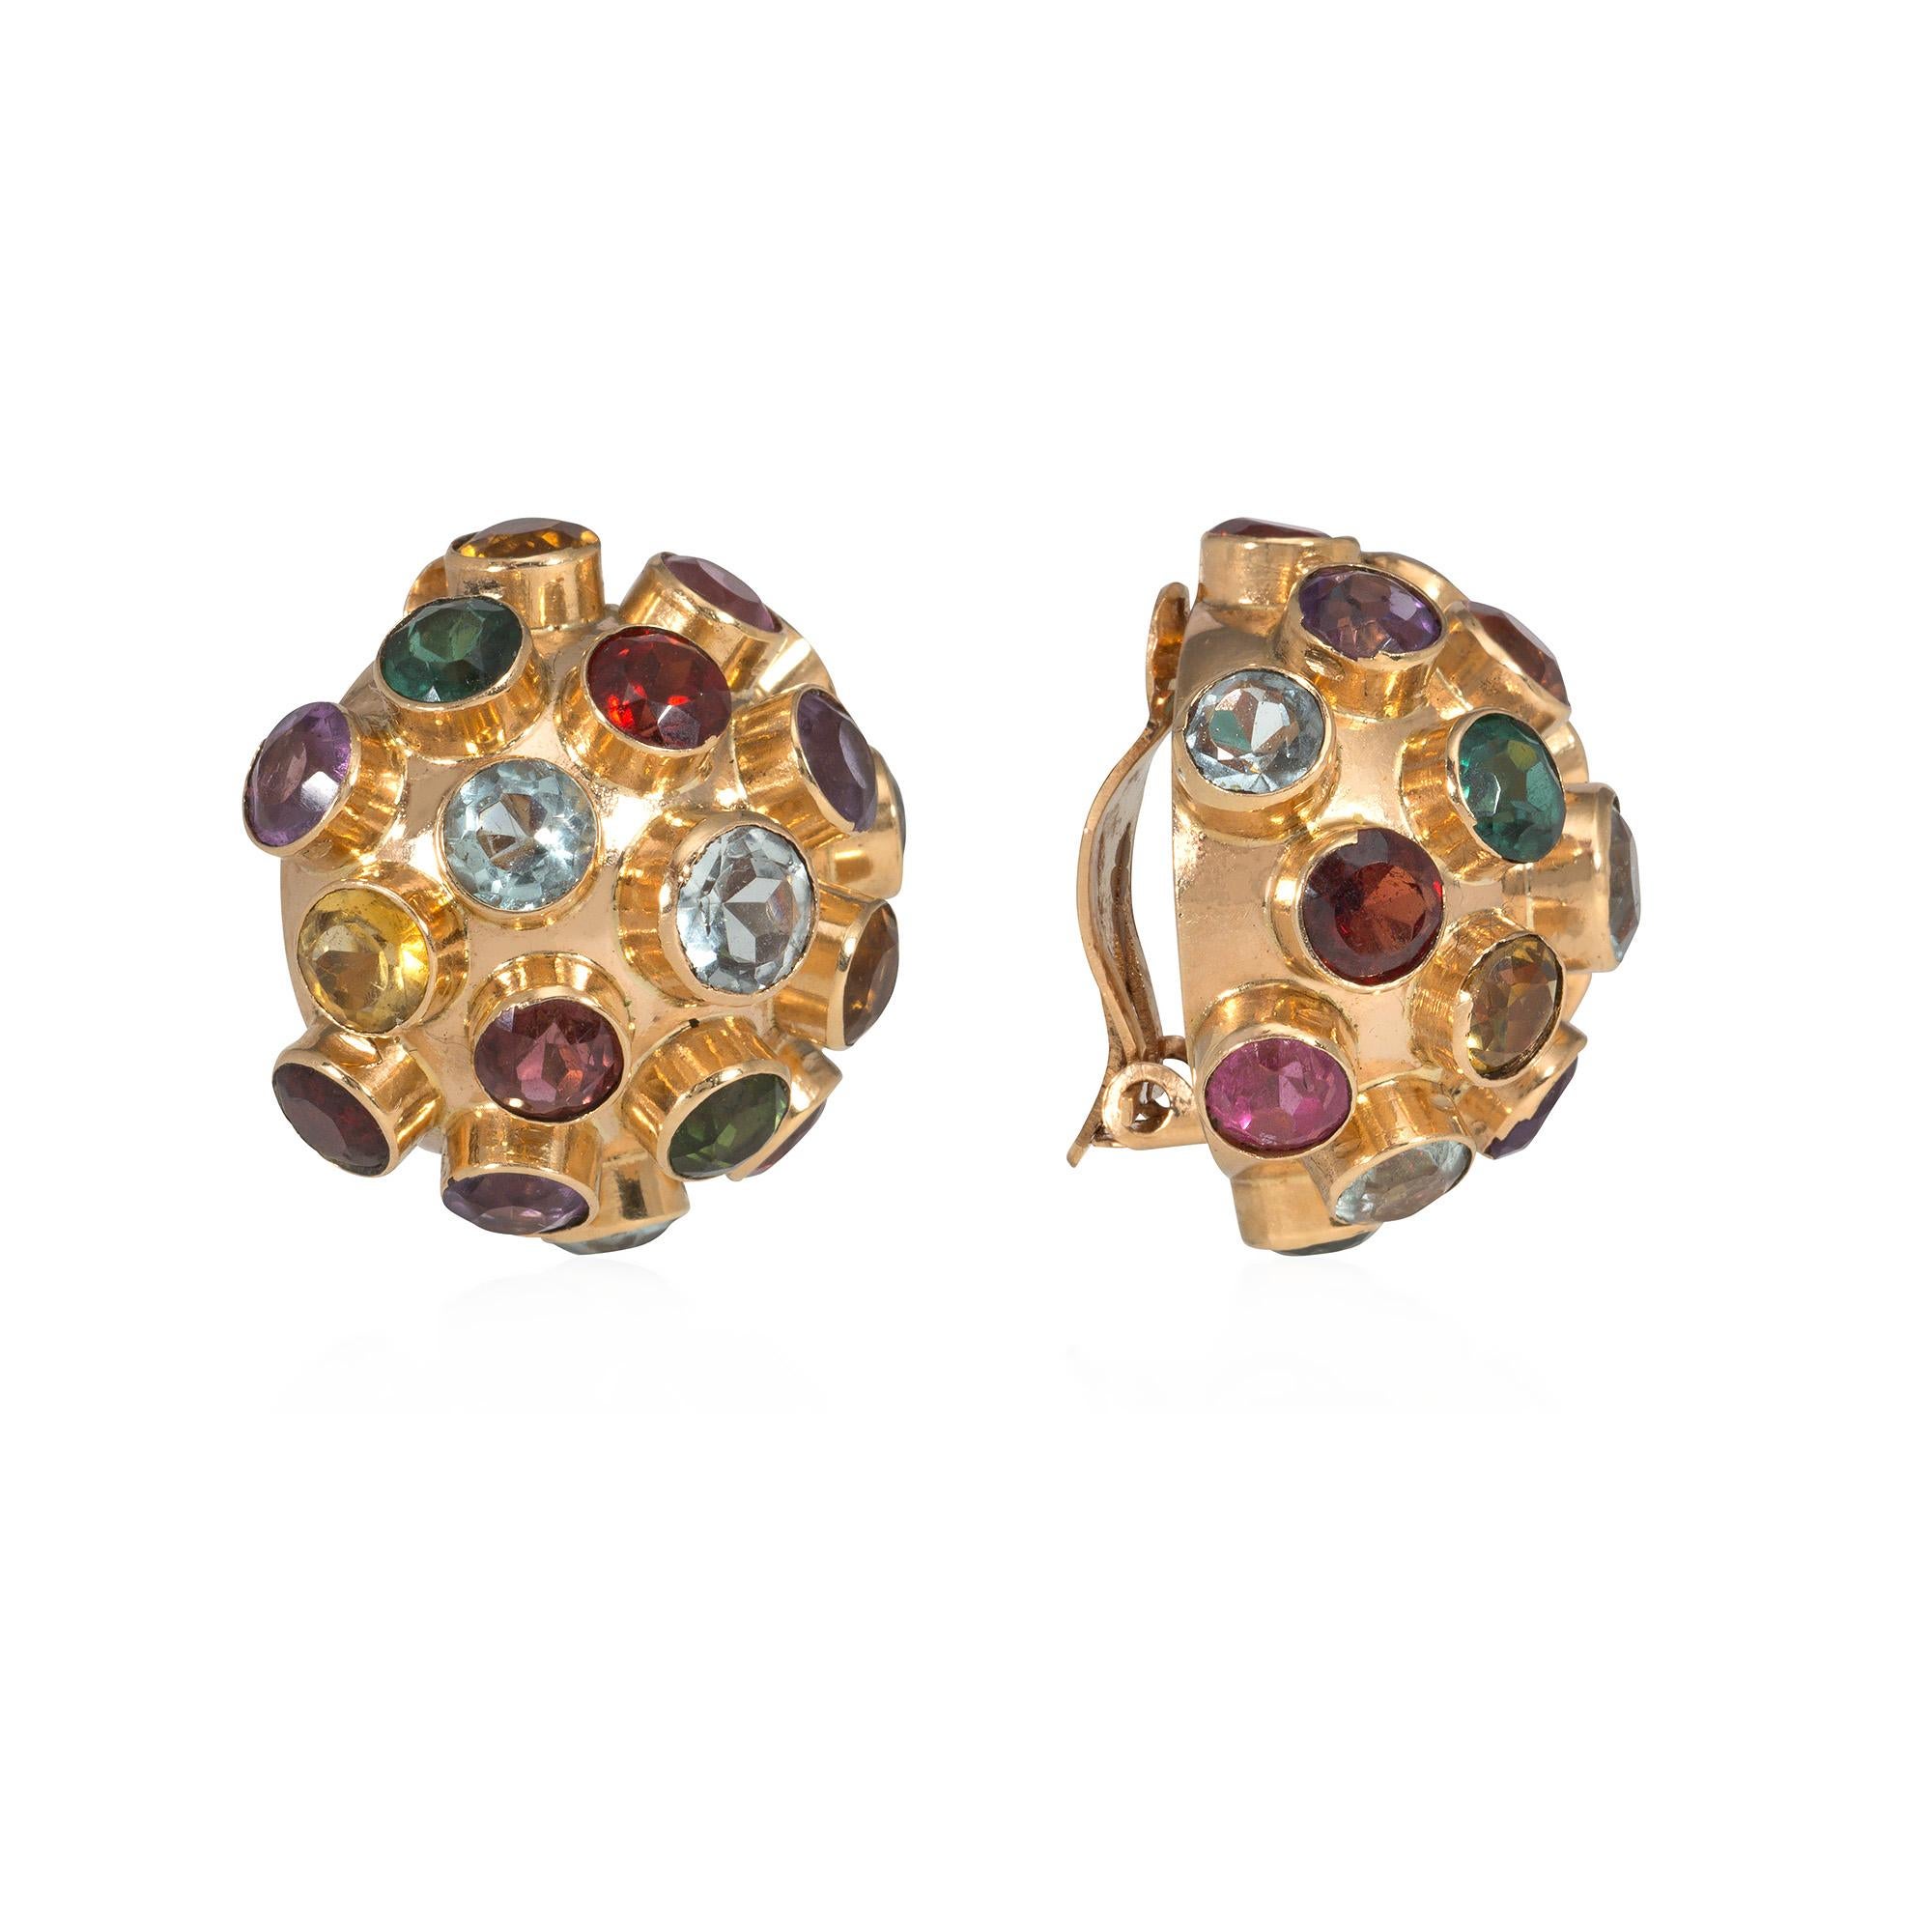 A pair of Retro gold and multi-colored gemstone clip earrings, the rose gold domes of sputnik design with collet-set tourmalines, garnet, zircon, amethyst and citrine, in 18k.

* Includes letter of authenticity
* Free shipping
* Please feel free to